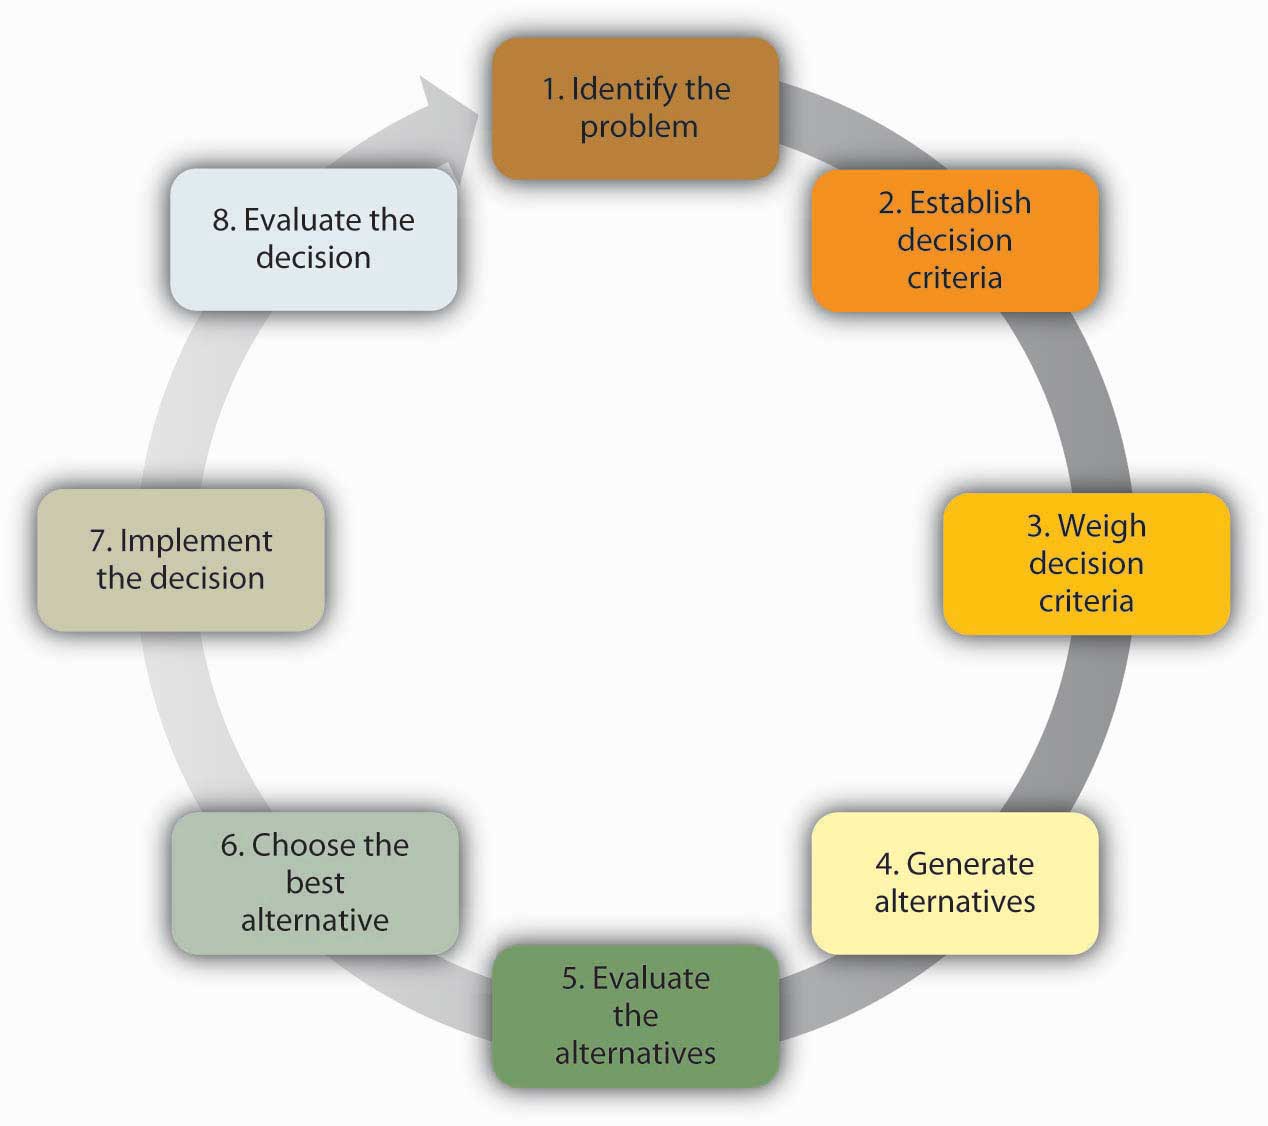 Steps in the Rational Decision-Making Model: 1) Identify the problem, 2) Establish decision criteria, 3) Weigh decision criteria, 4) Generate alternatives, 5) Evaluate the alternatives, 6) Choose the best alternative, 7) Implement the decision, 8) Evaluate the decision